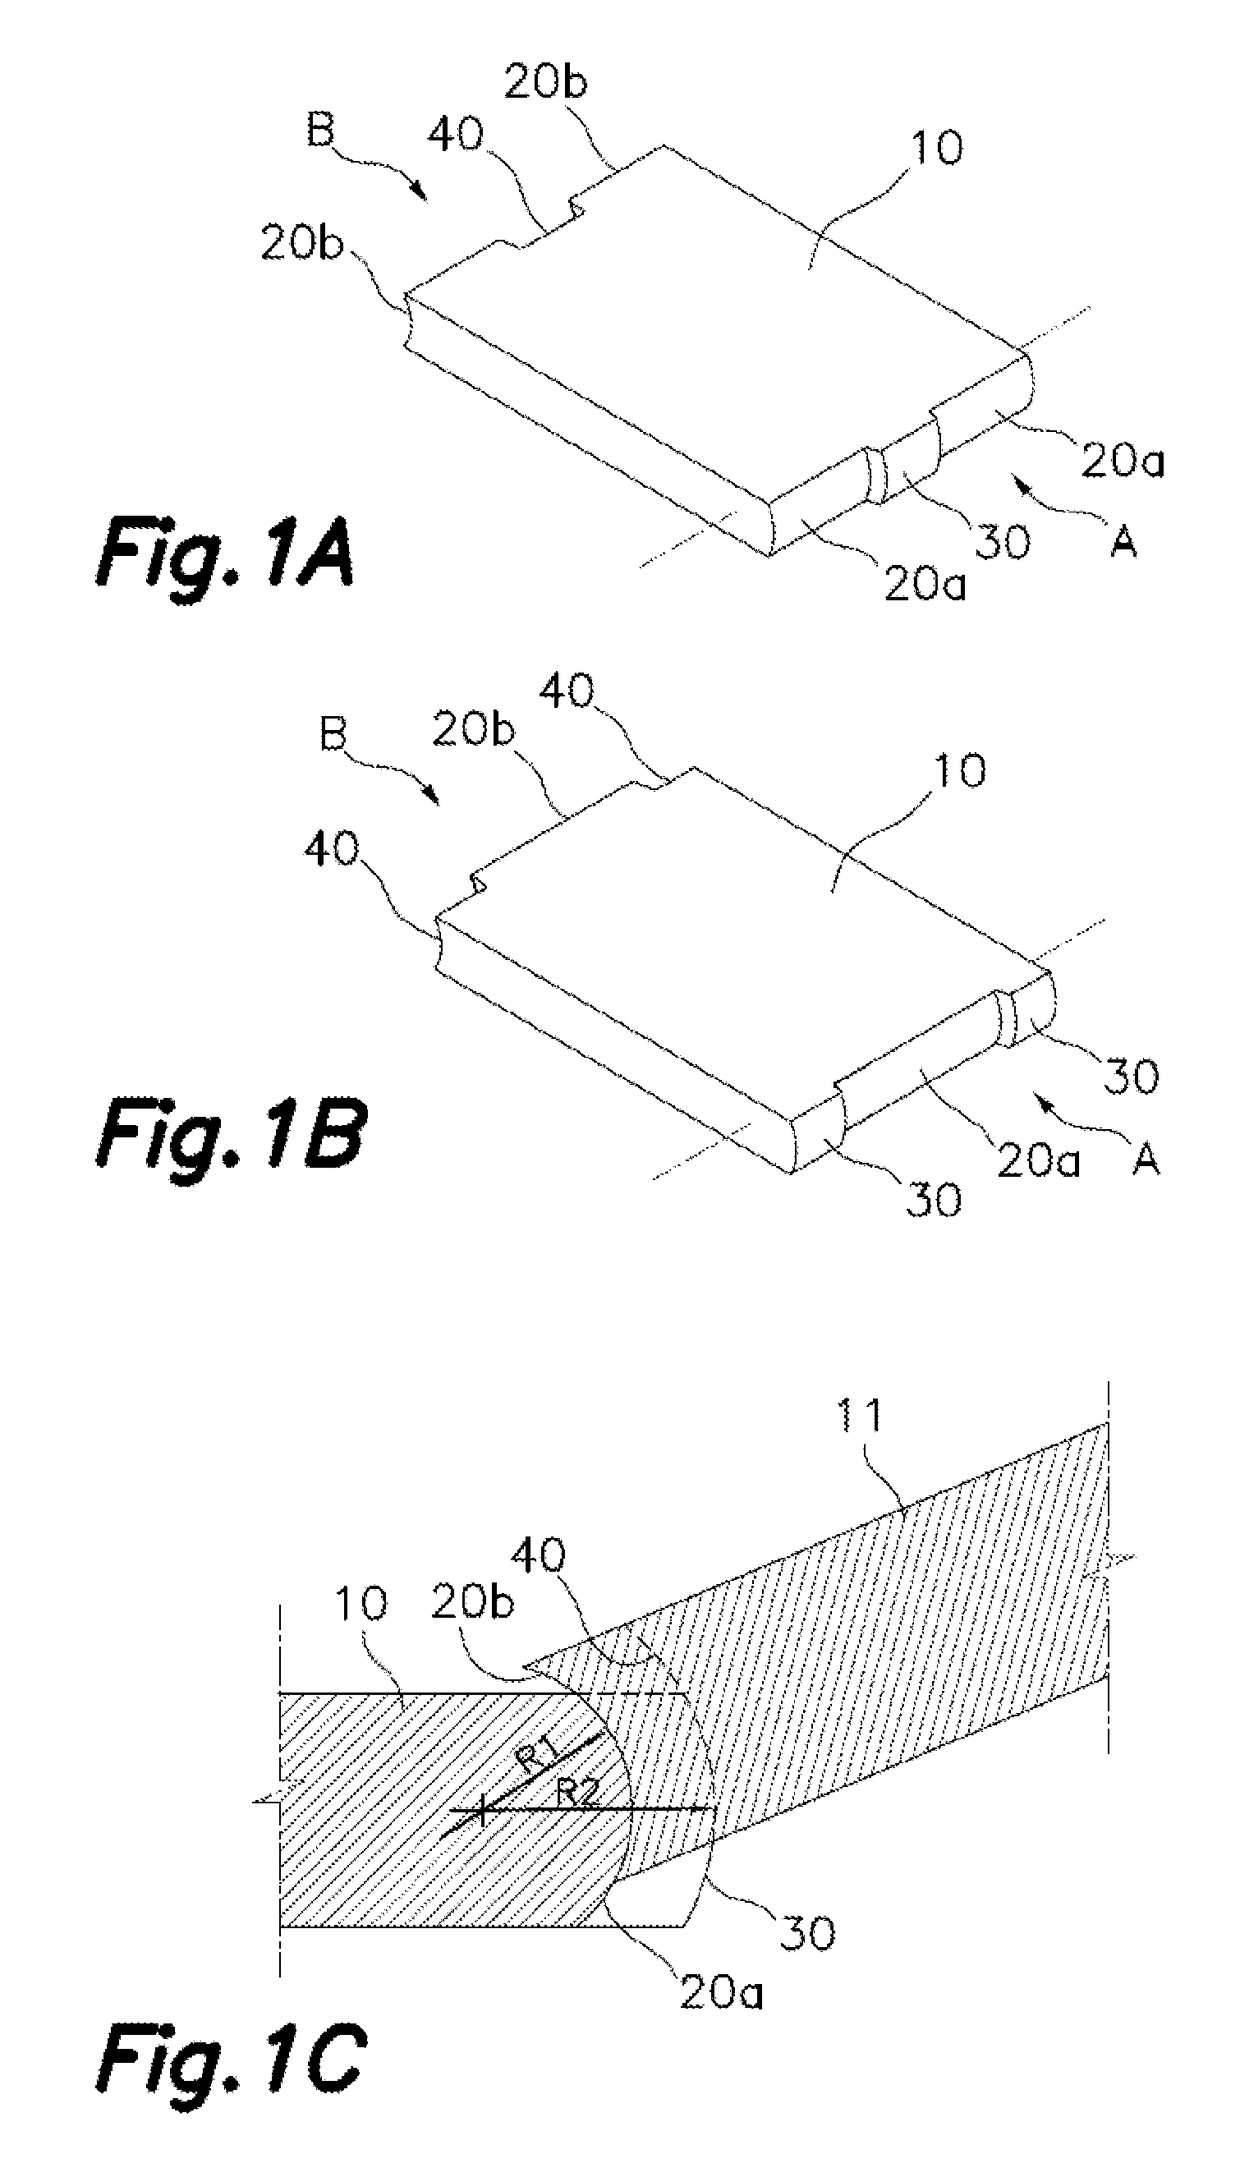 Flexible elongated inductor and elongated and flexible low-frequency antenna